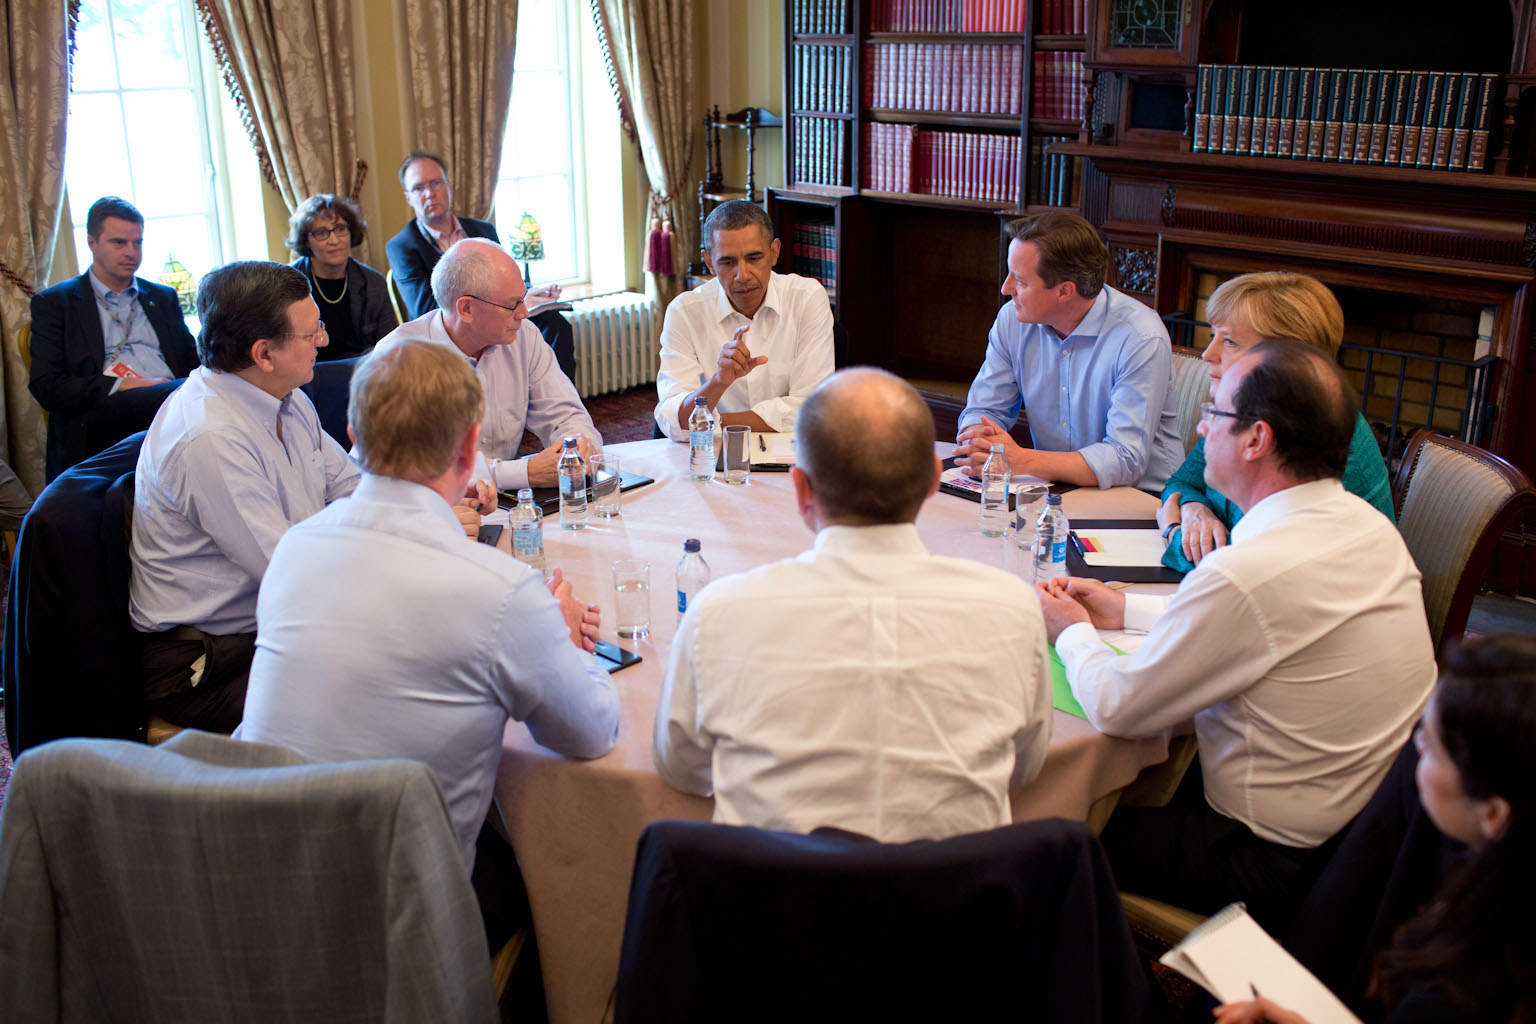 President Barack Obama participates in a G8 Summit meeting on Transatlantic Trade and Investment Partnership